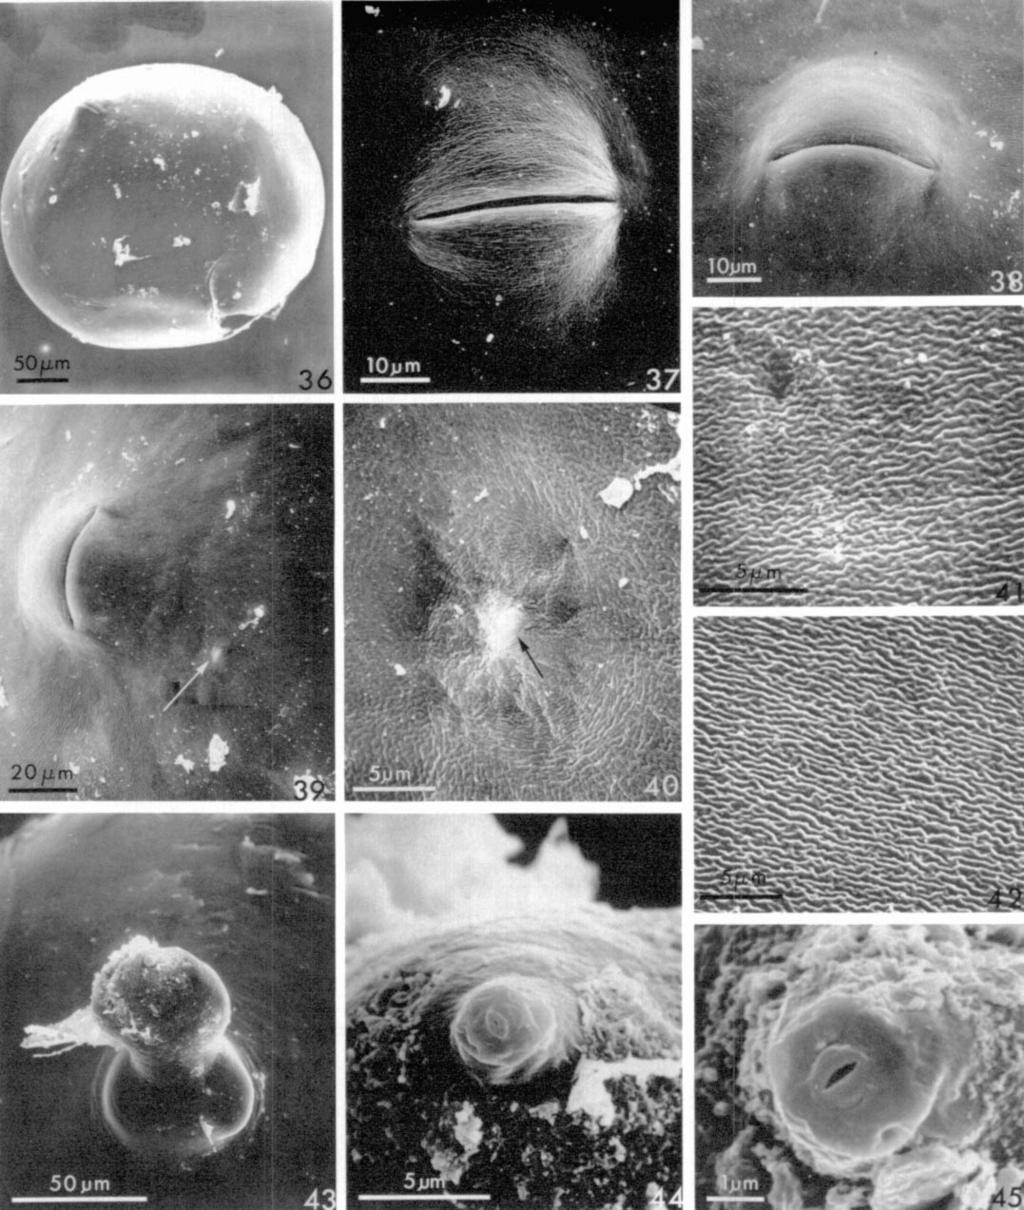 Meloidoderita Taxonomy: Golden, Handoo 271 F16s. 36-45. SEM micrographs of females ofmeloidoderita polygoni n. sp. 36) Posterior view of intact female showing protruding vulva.